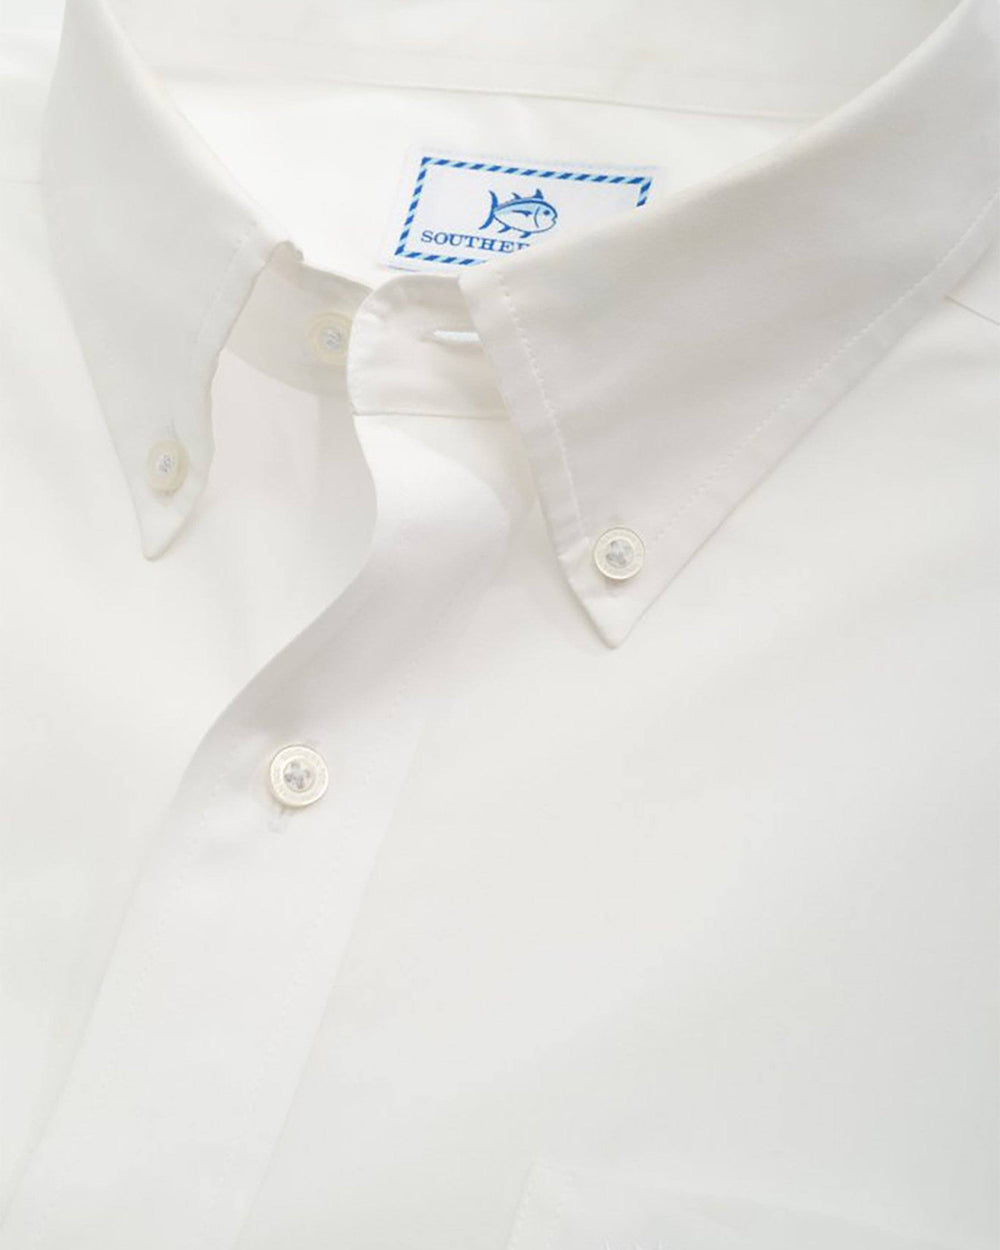 The detail of the Men's White Sullivans Solid Button Down Shirt by Southern Tide - Classic White